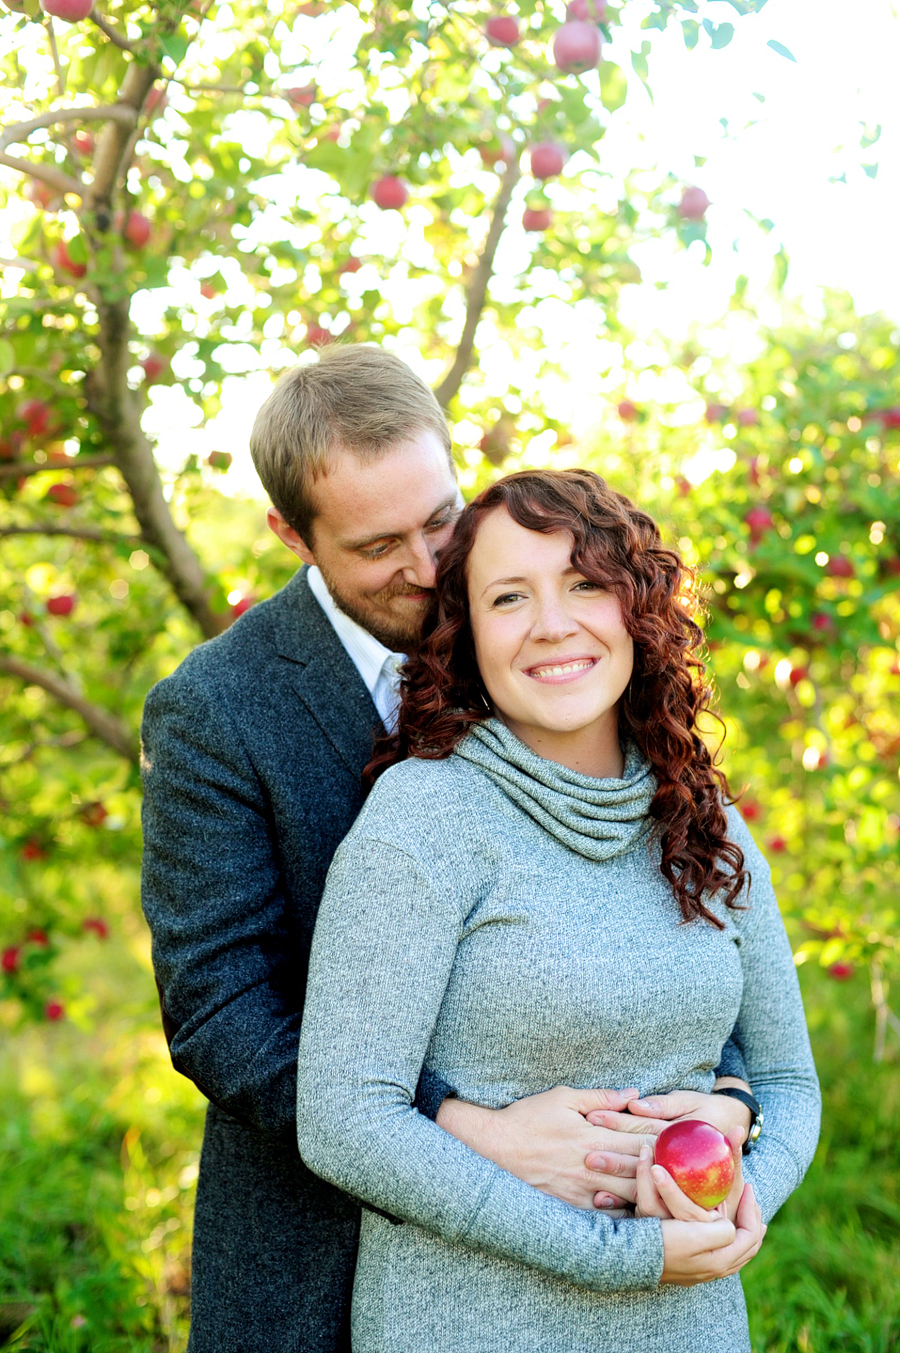 silly, fun engagement photos in an apple orchard